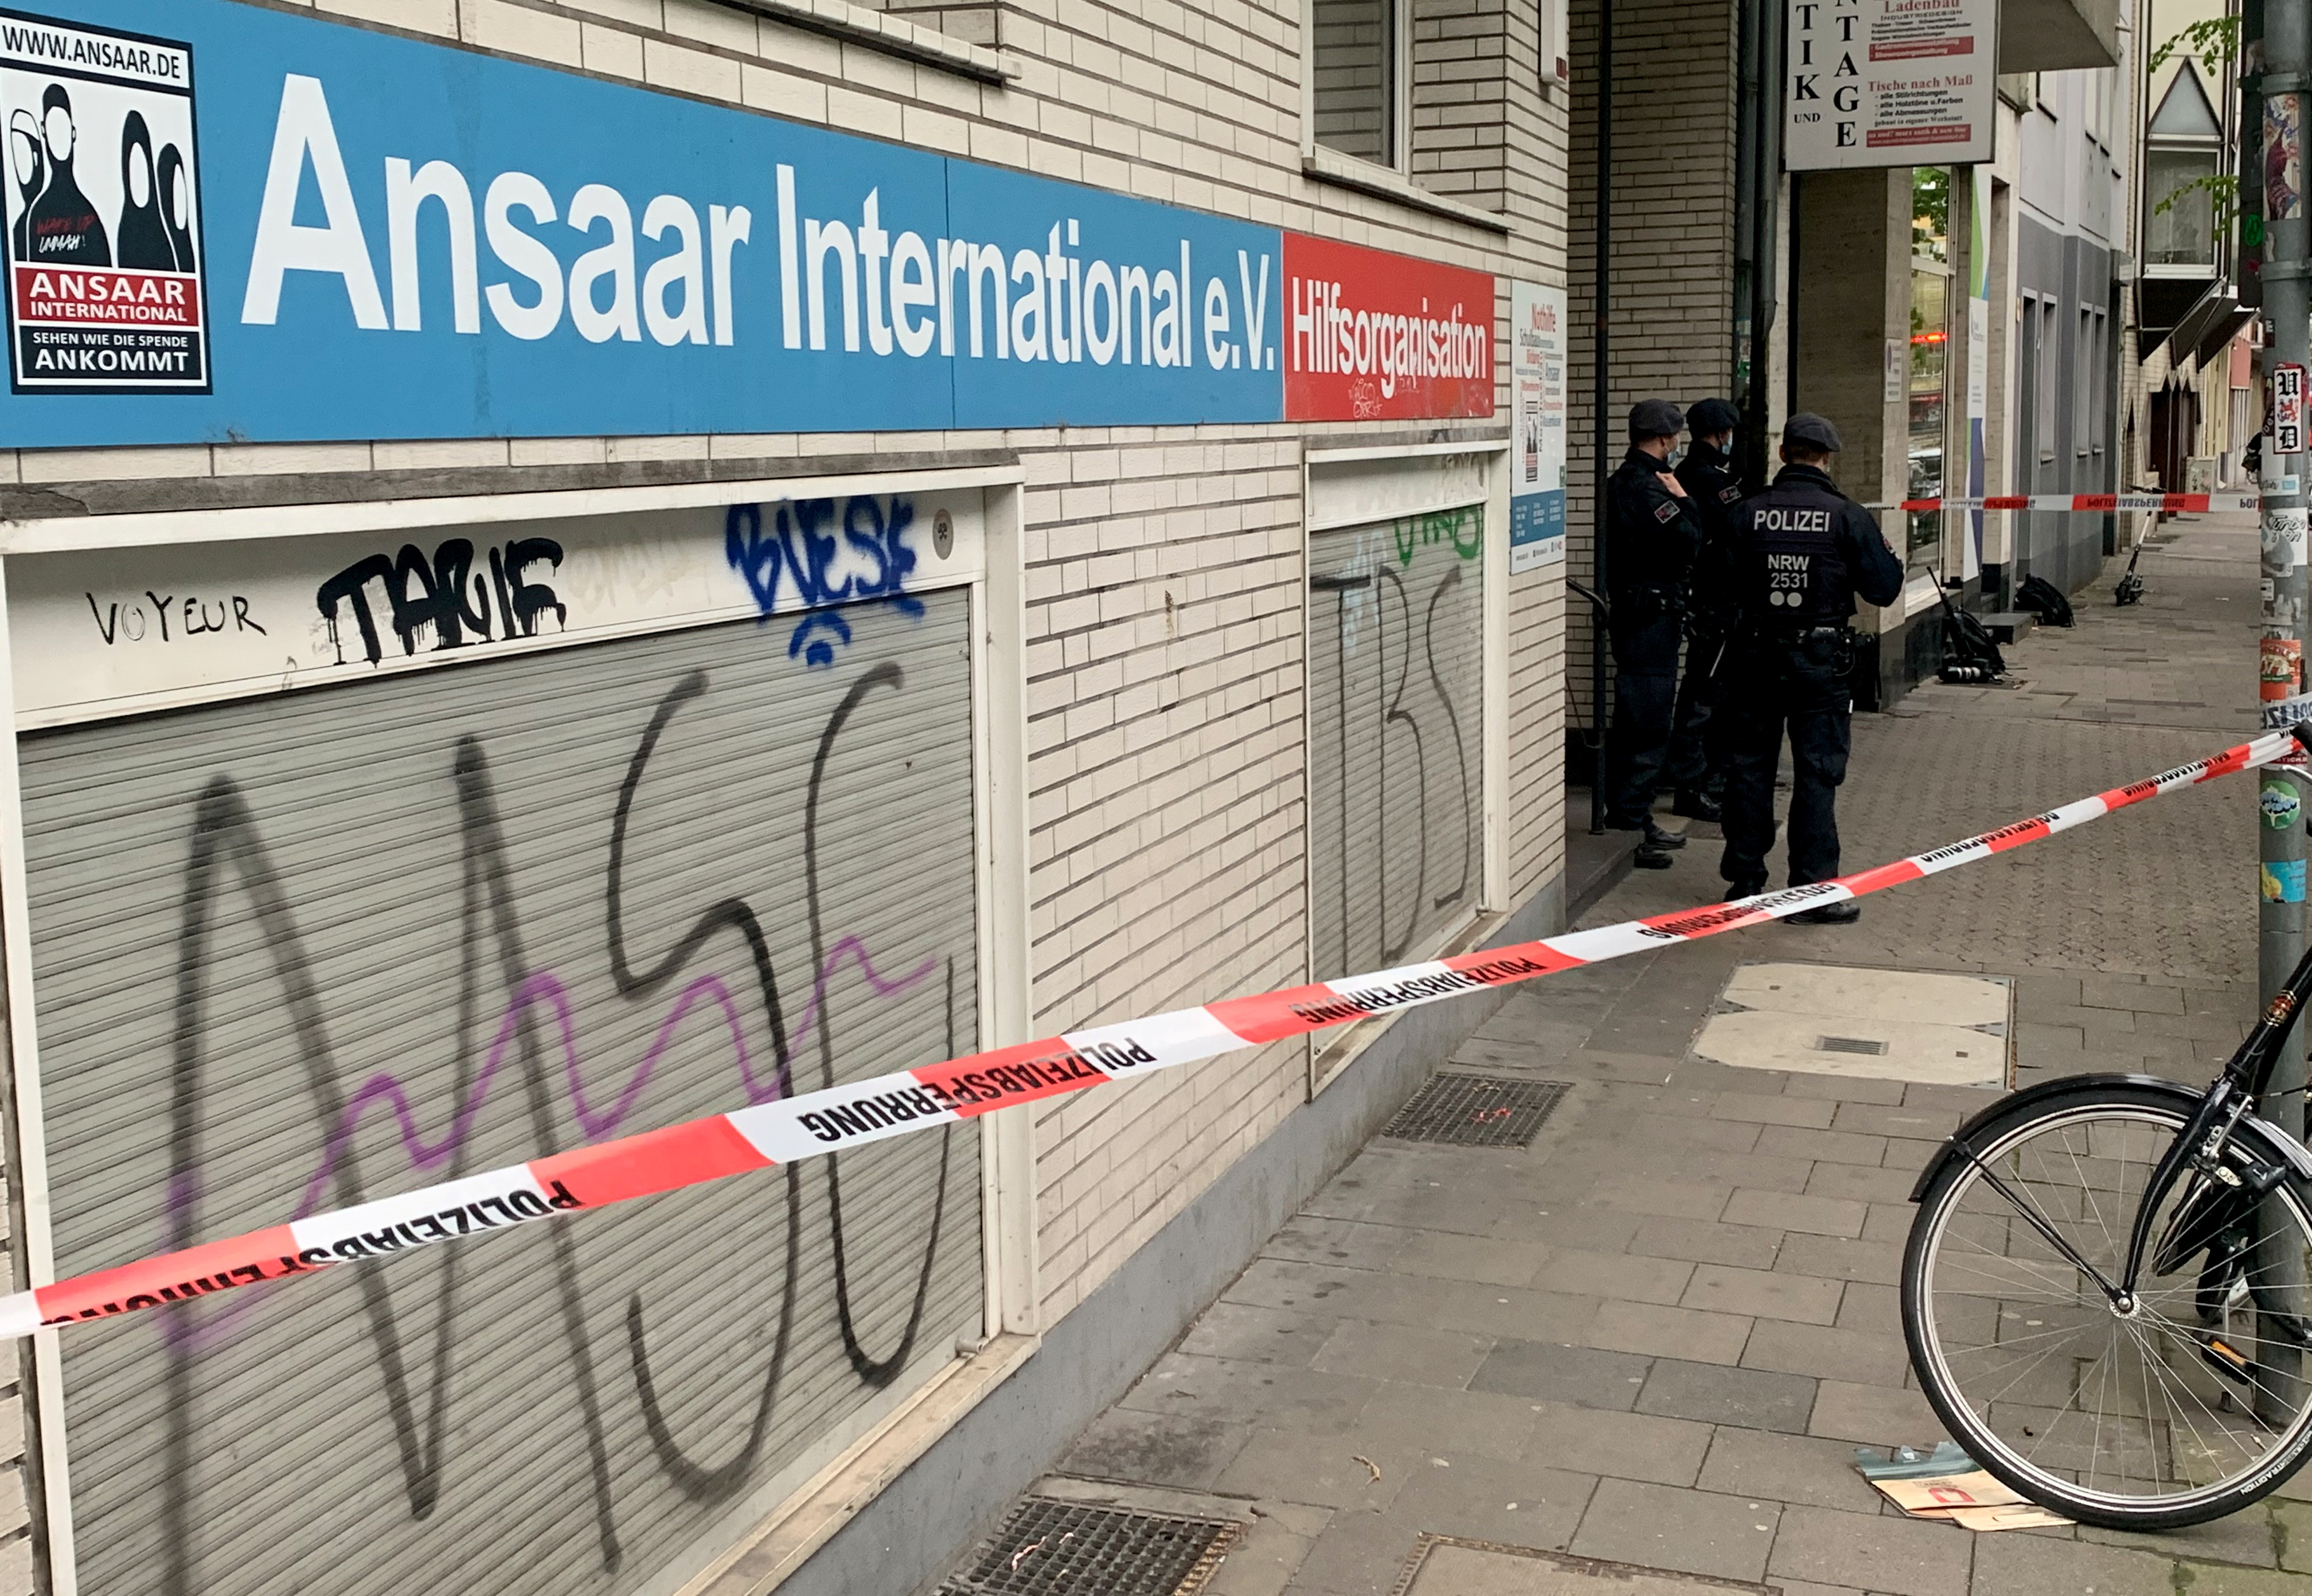 Police secures a building after Germany banned the Islamic organisation Ansaar International in Dusseldorf